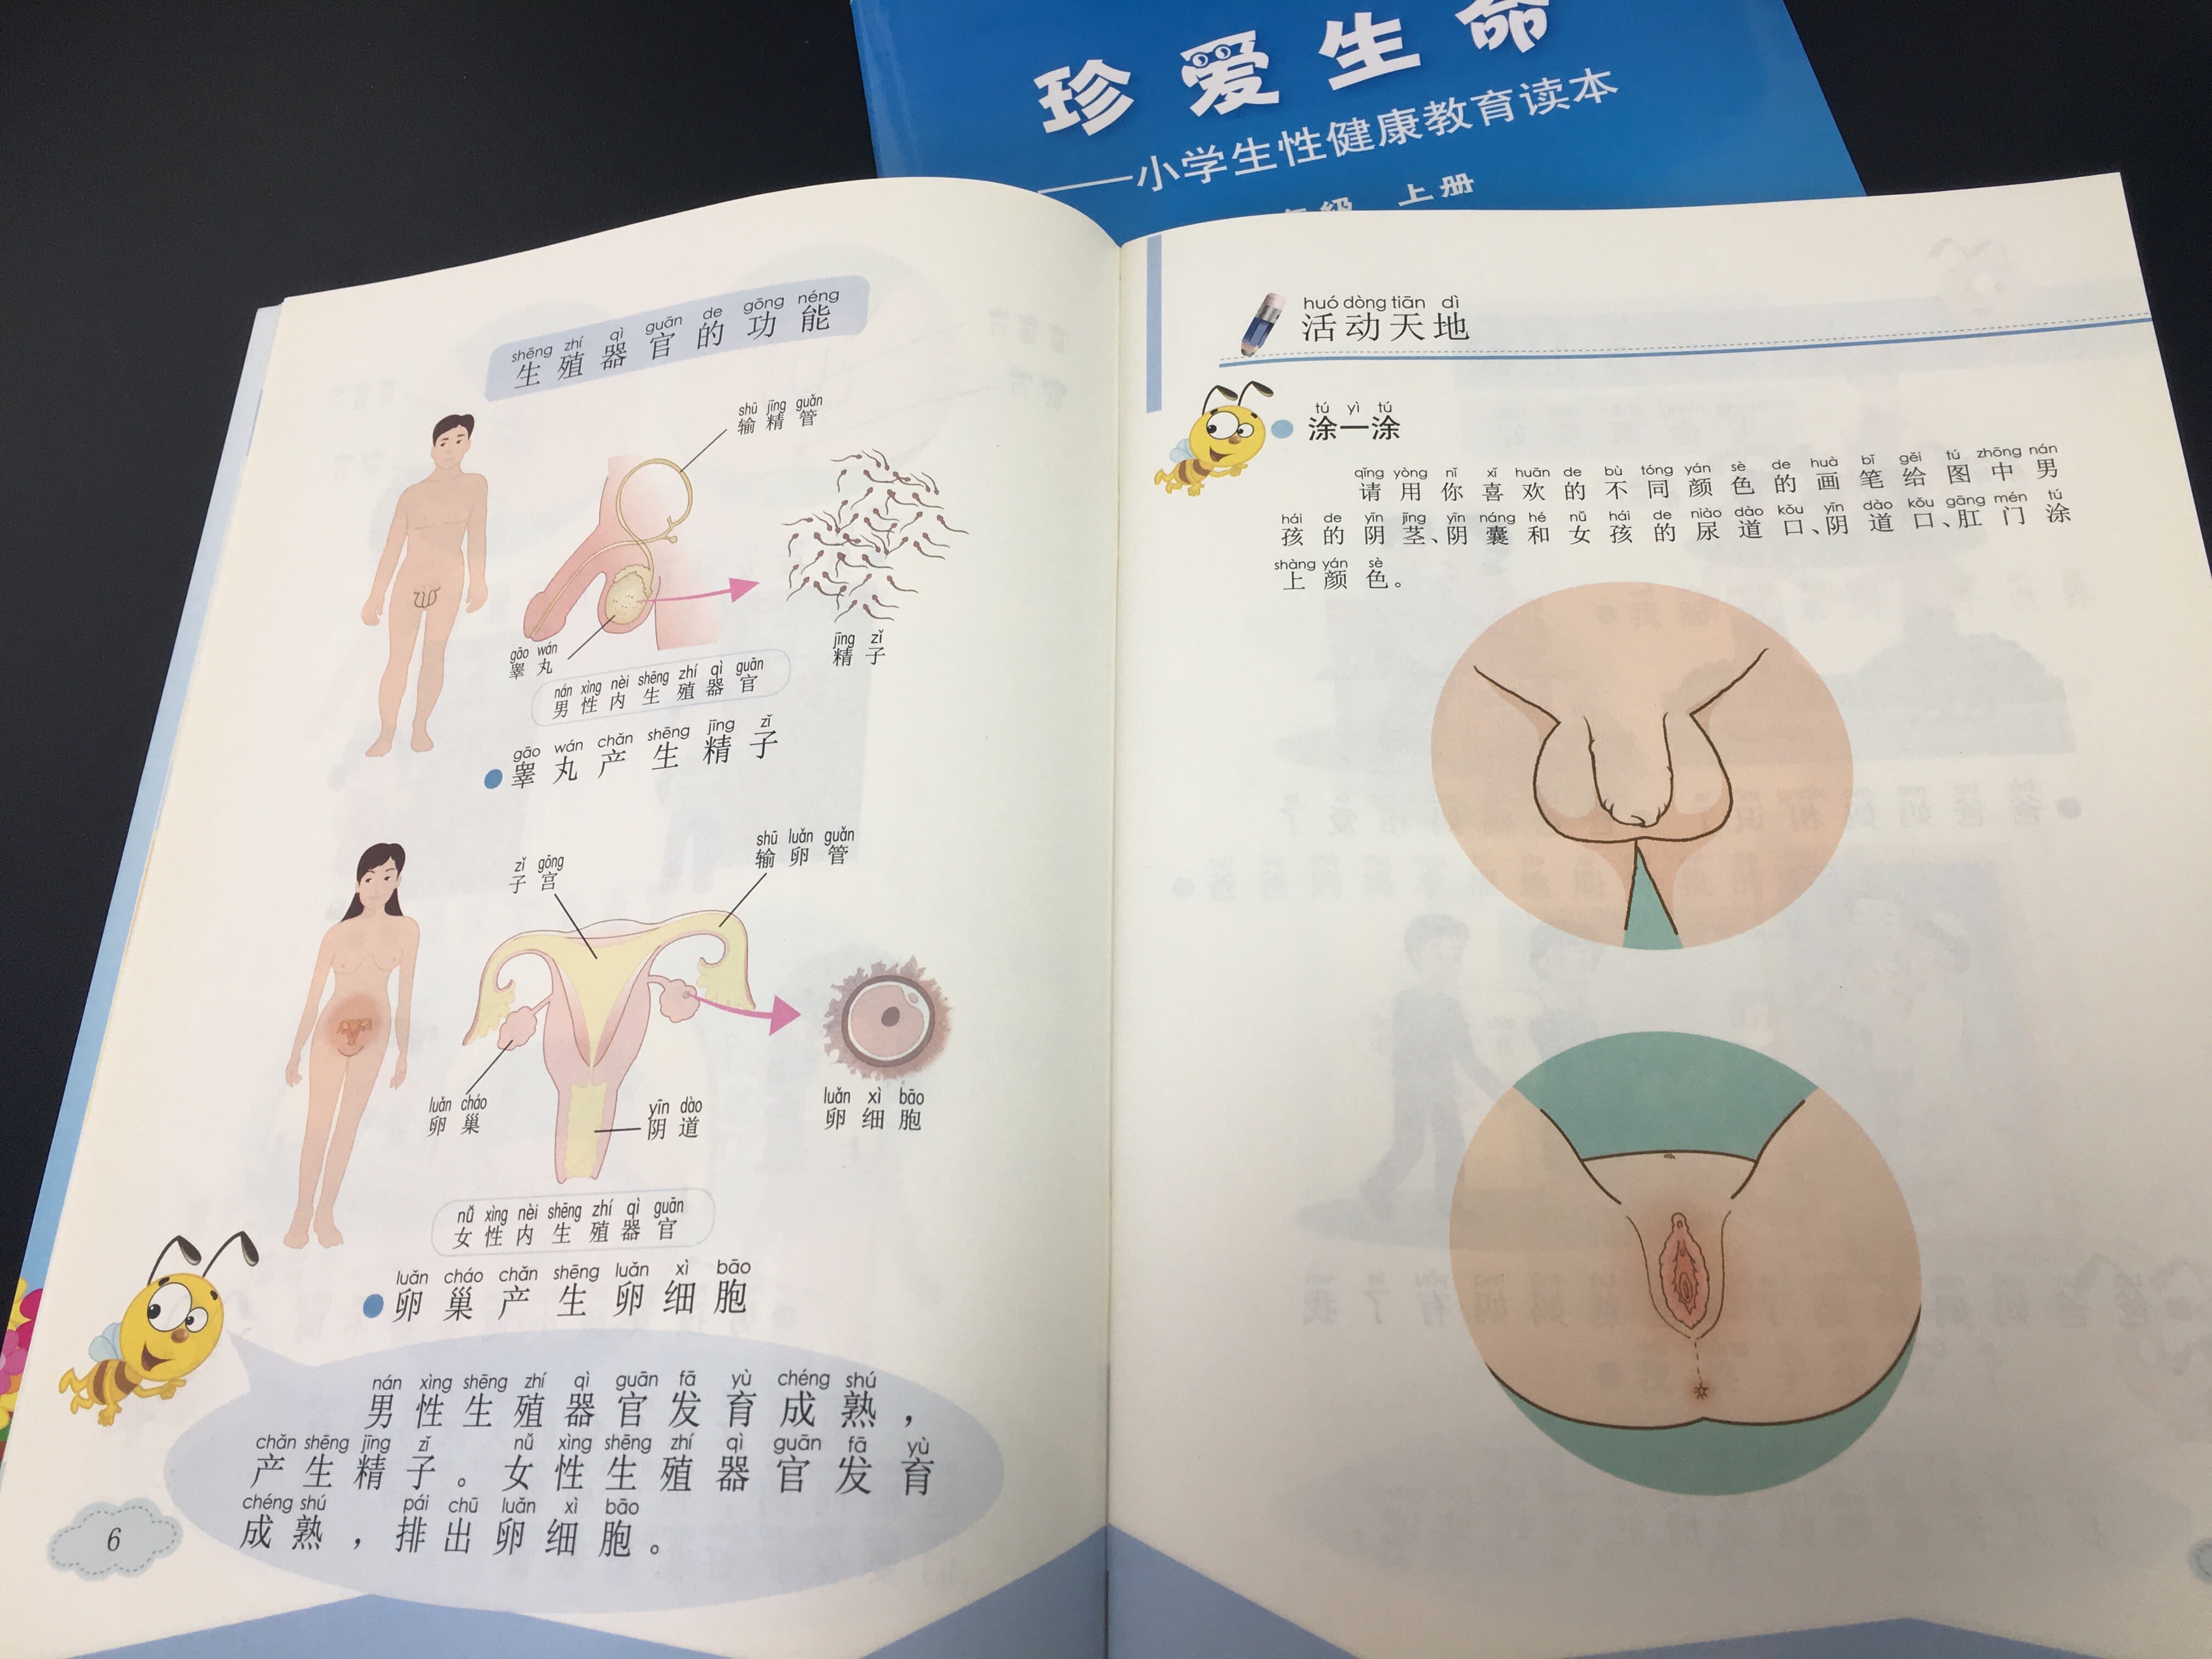 Real School Sex - Shock and praise for groundbreaking sex-ed textbook in China | CNN